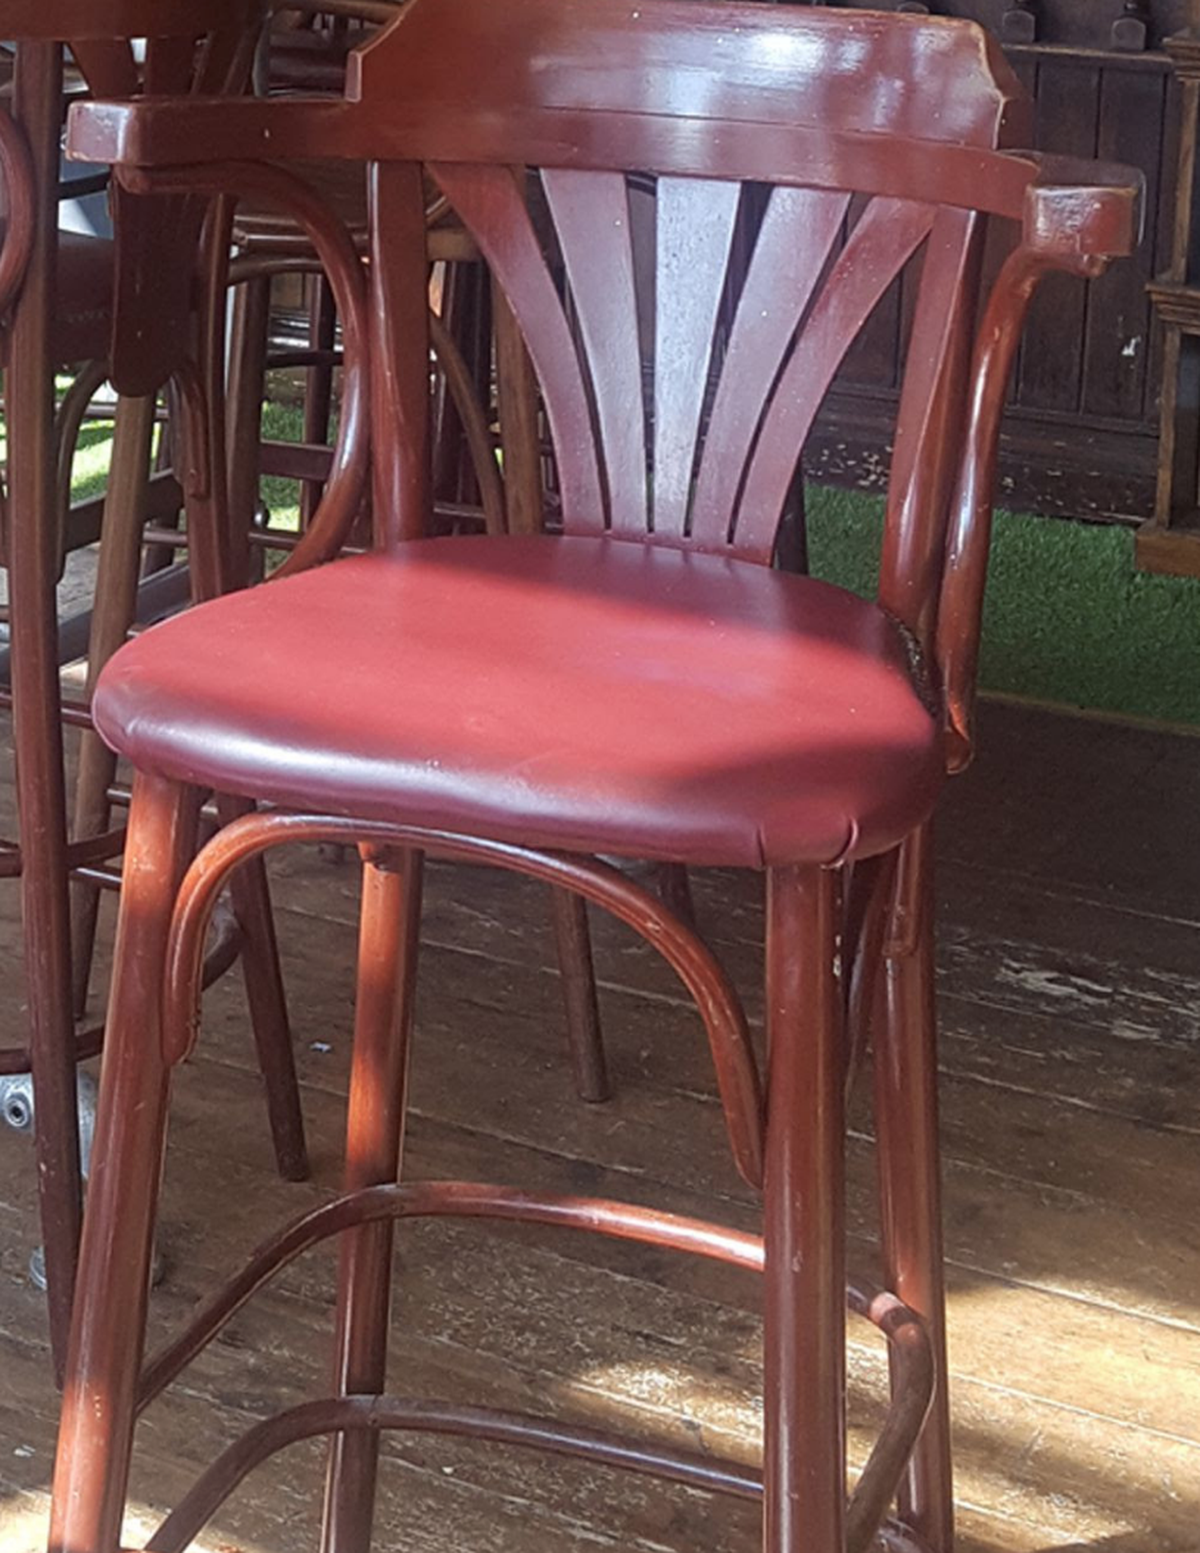 Secondhand Chairs and Tables | Pub and Bar Furniture | 6x Bentwood